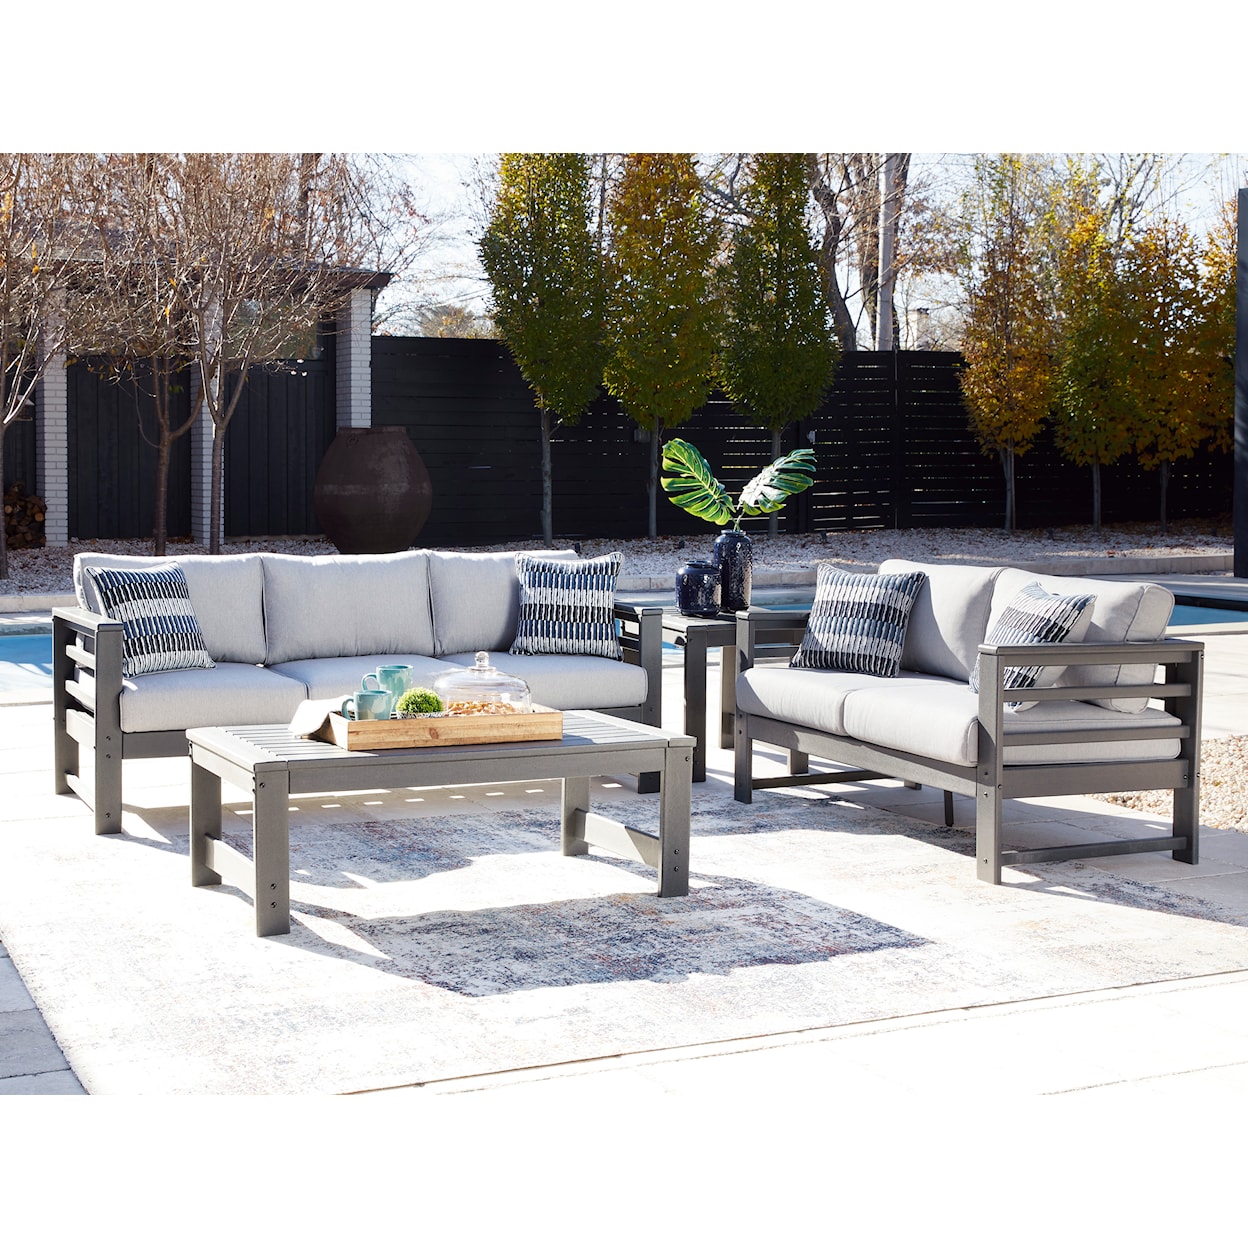 Signature Design by Ashley Amora Outdoor Loveseat with Cushion